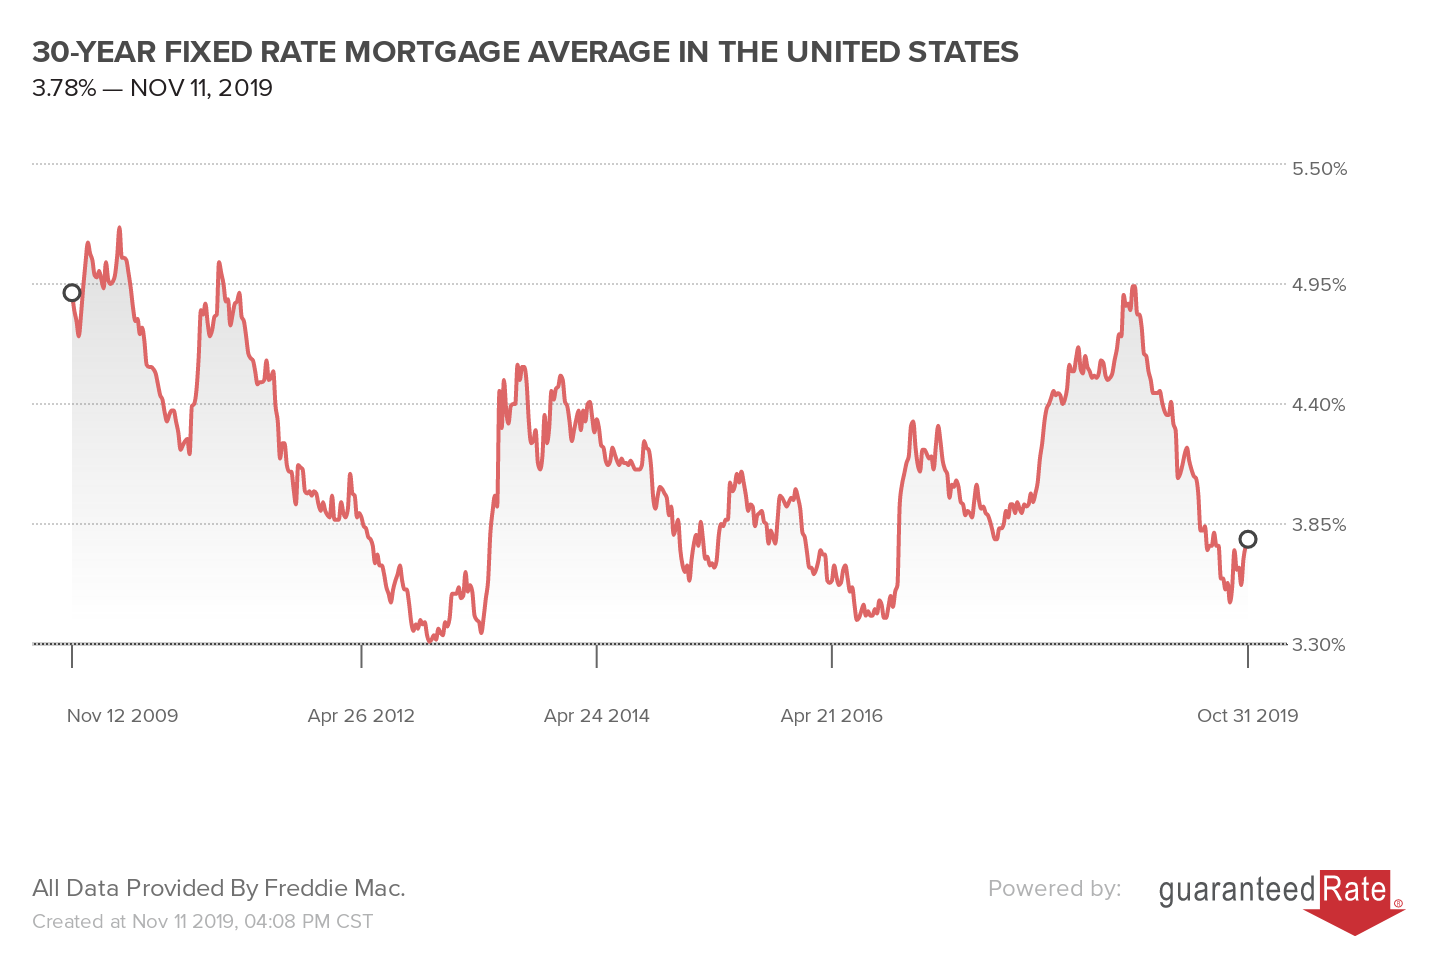 30-YEAR FIXED RATE MORTGAGE AVERAGE IN THE UNITED STATES